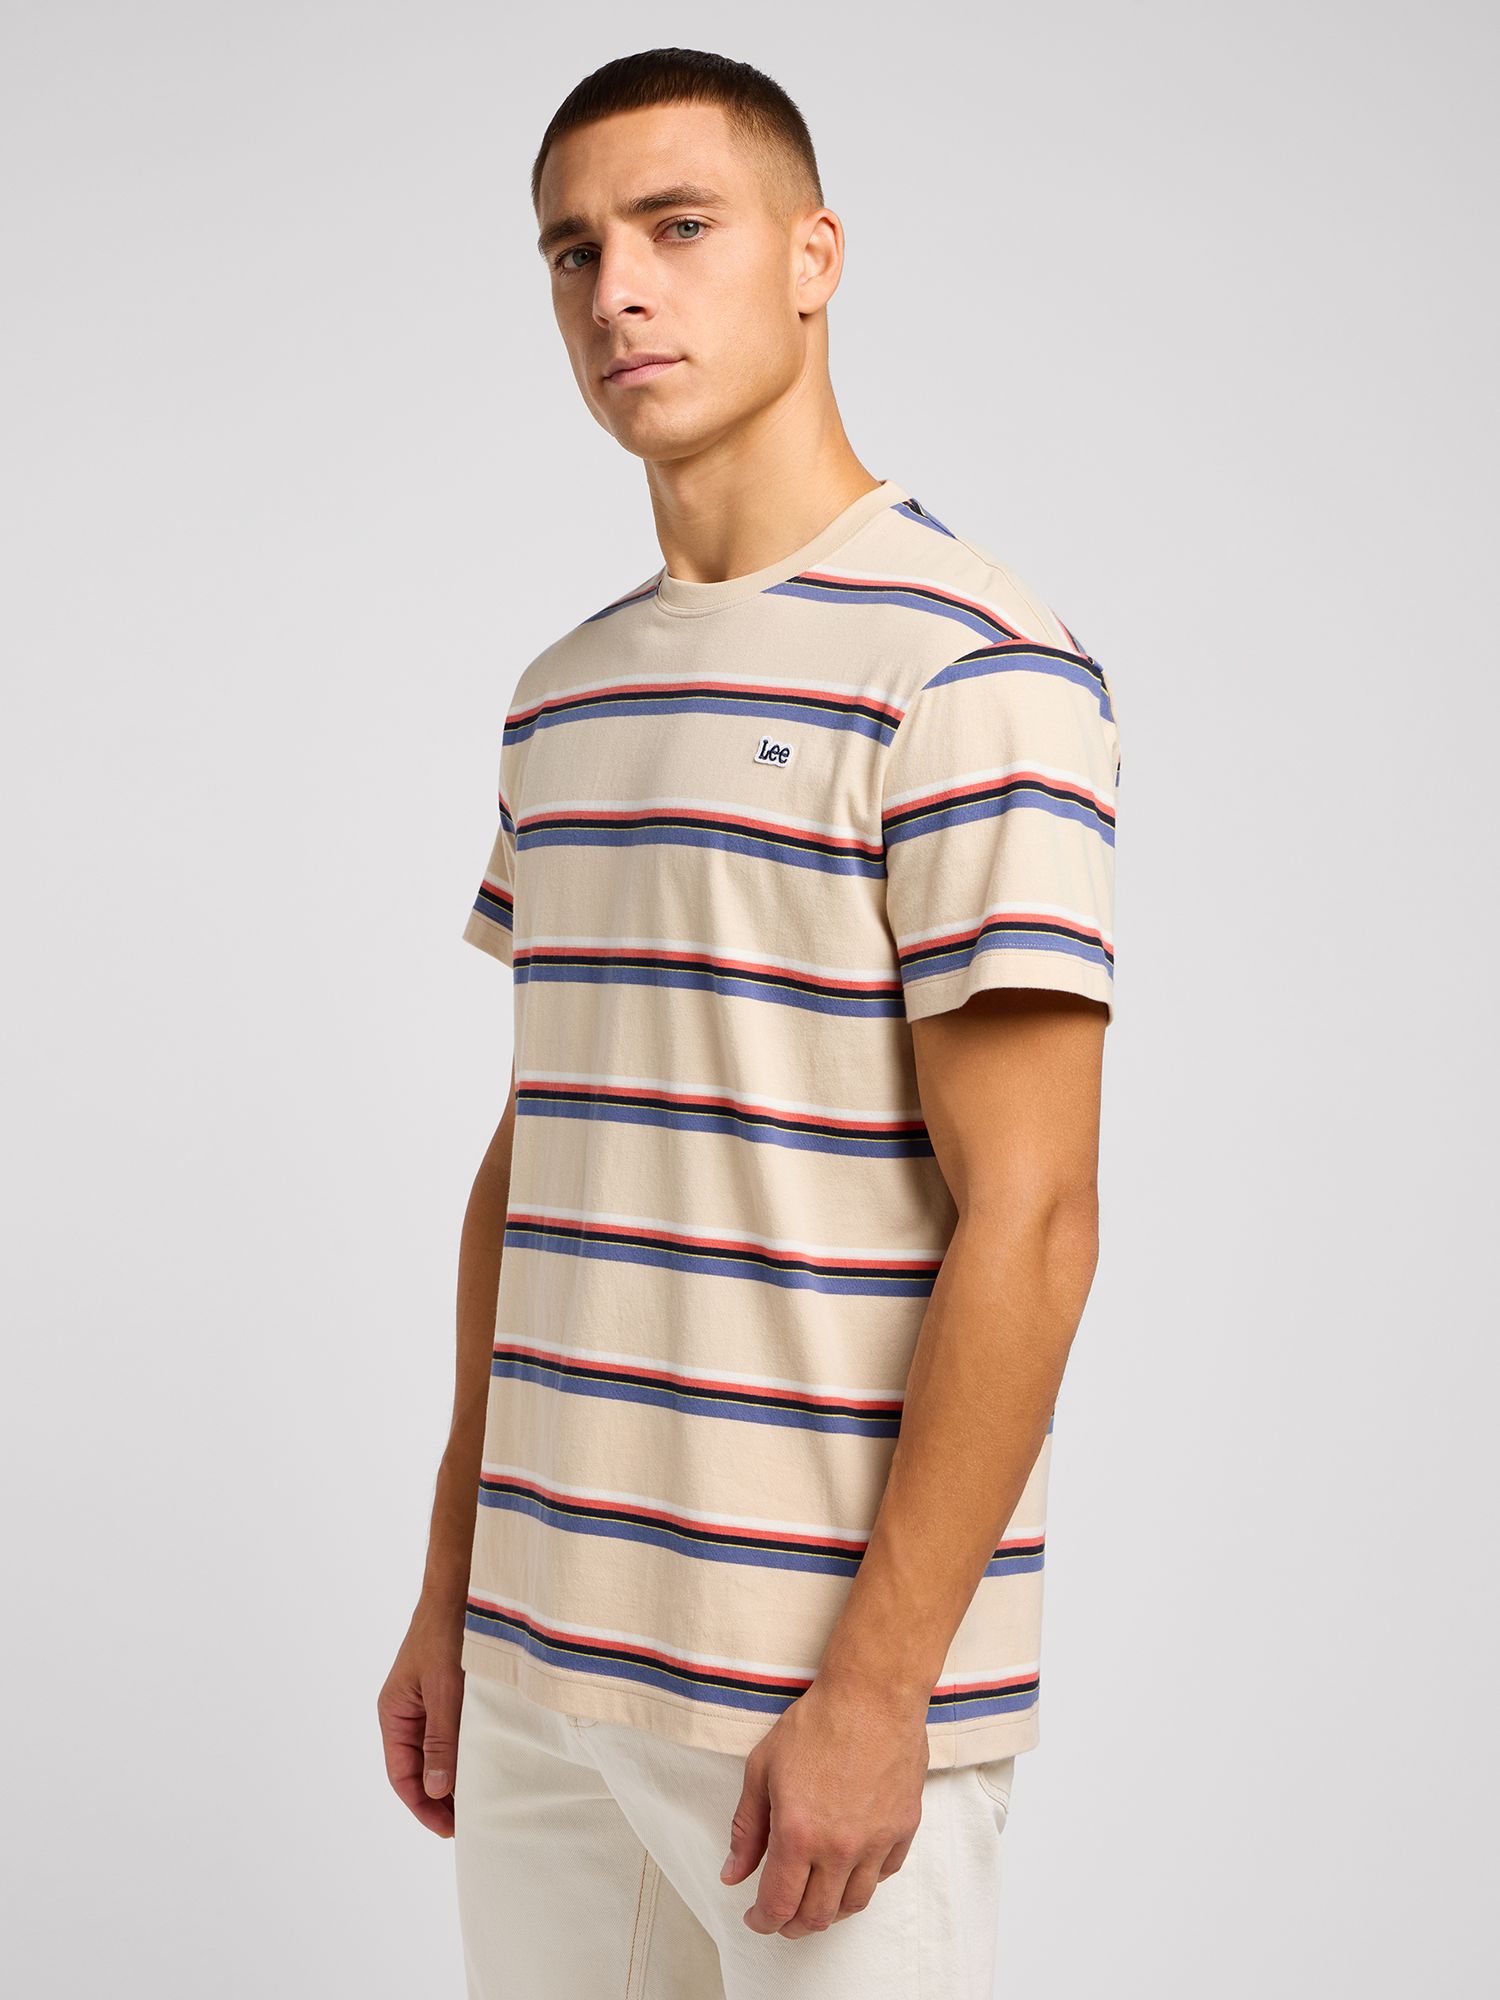 Lee Relaxed Double Stripe T-Shirt, Multi, S